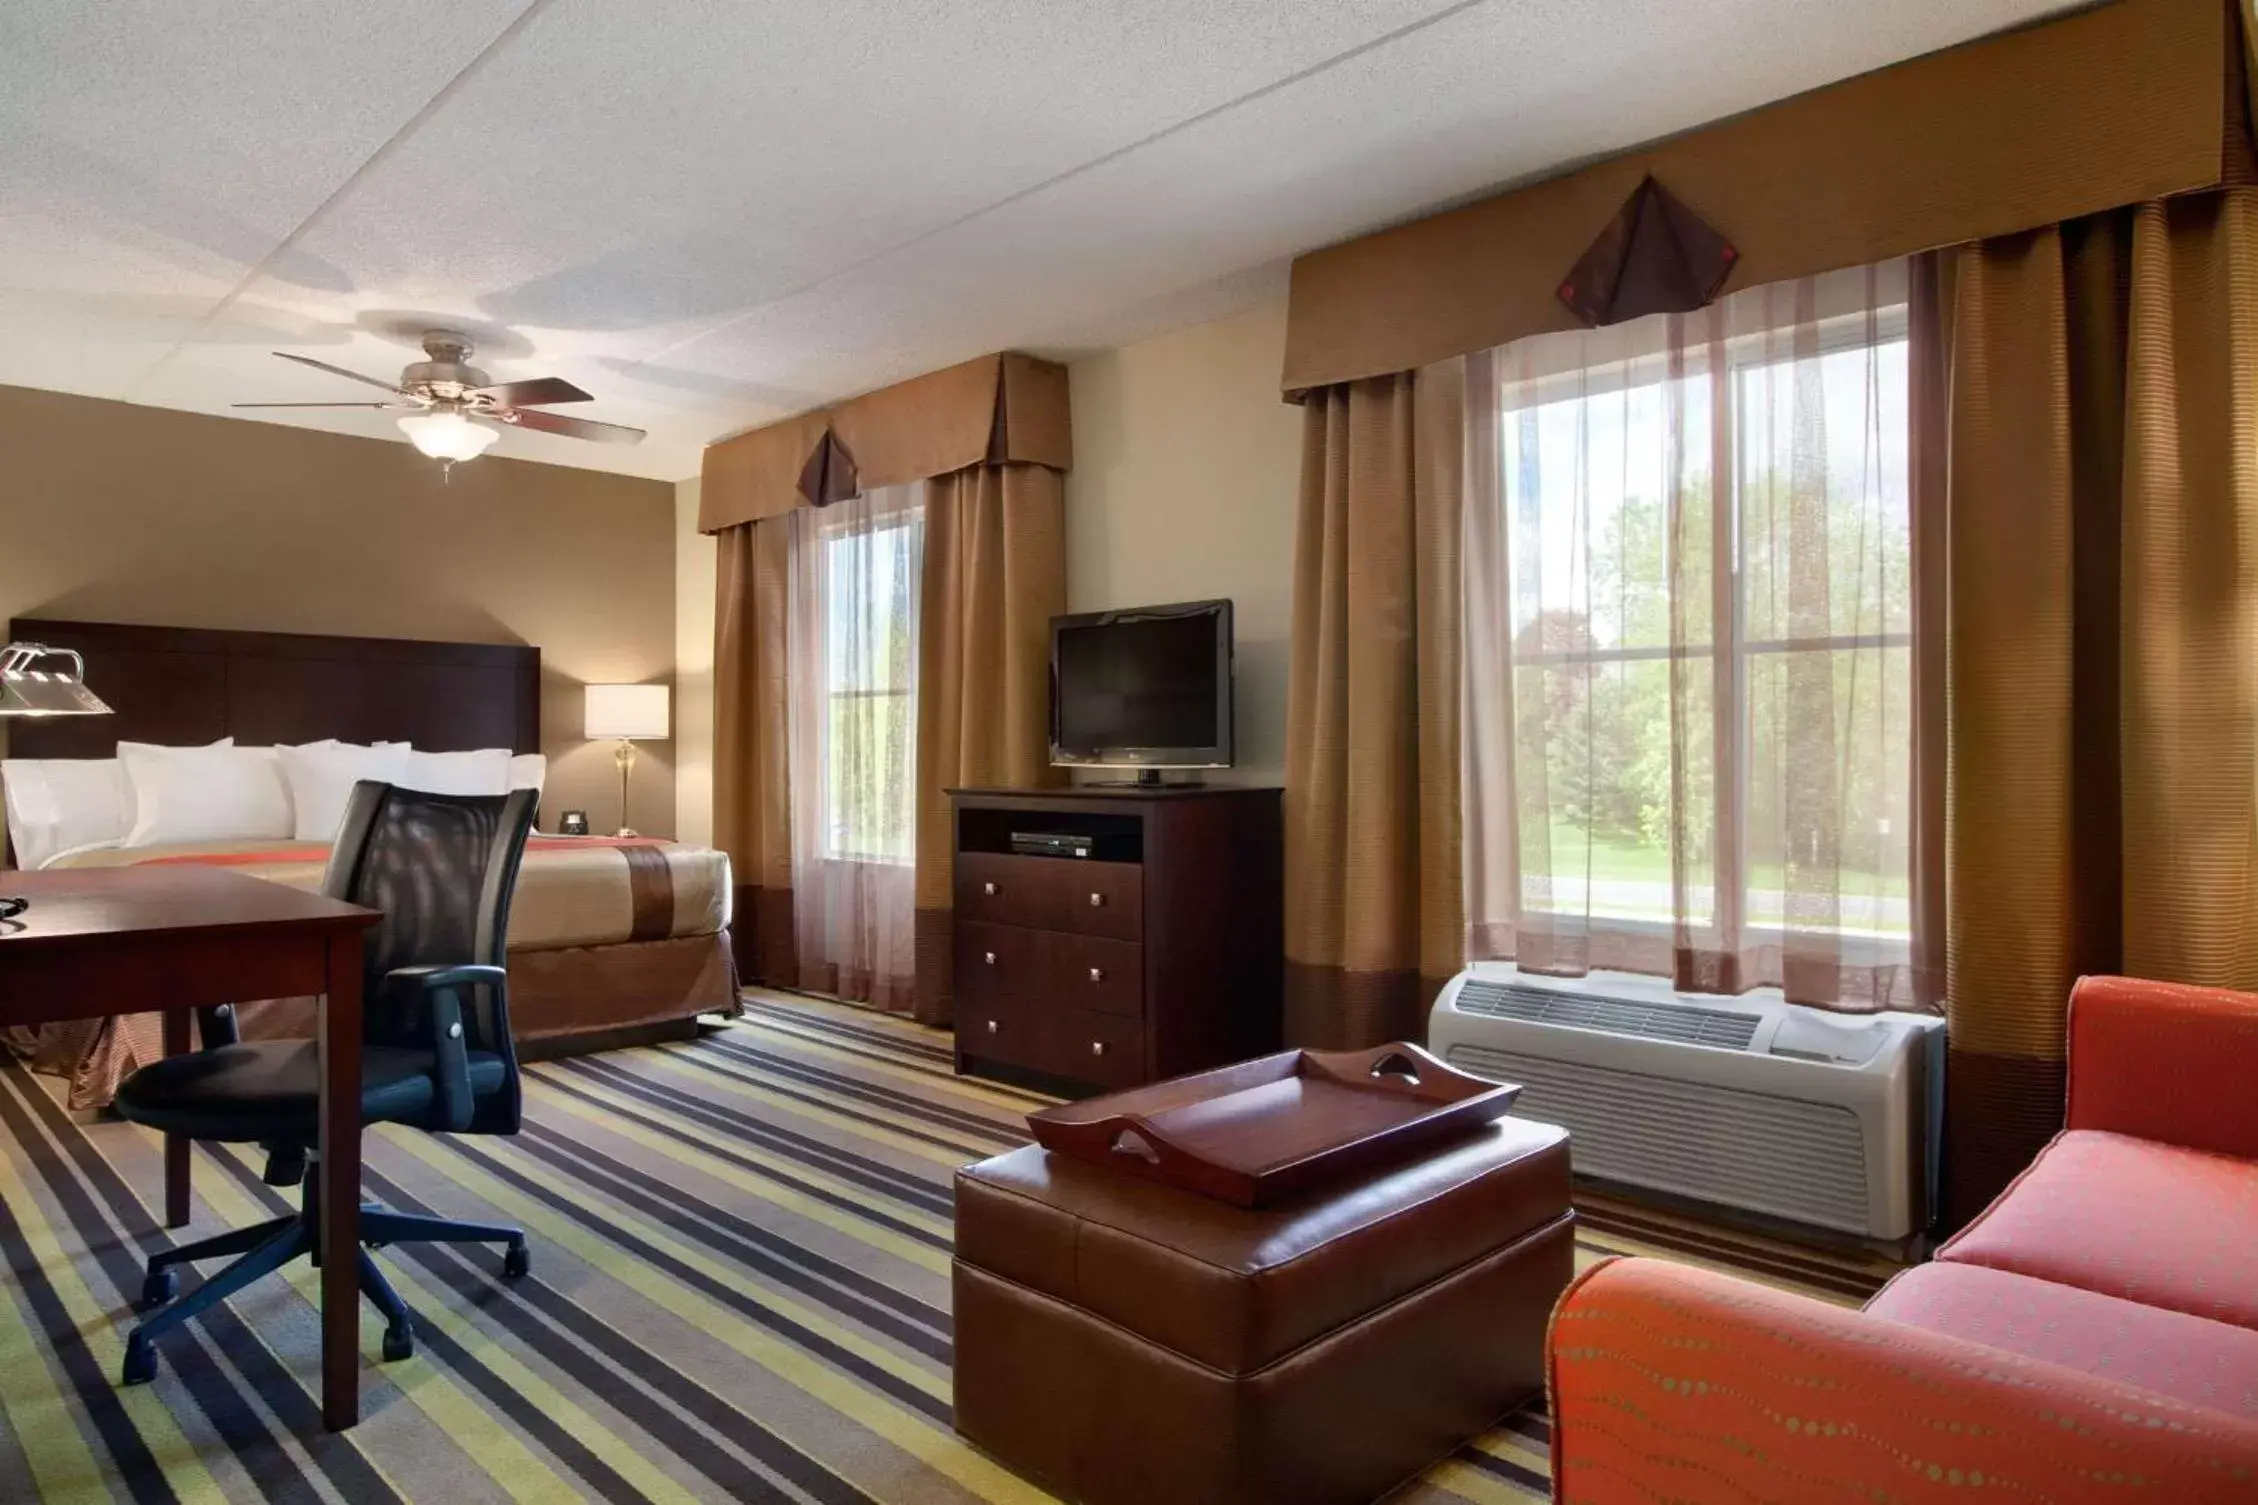 Bed, TV/Entertainment Center in Homewood Suites by Hilton Rochester/Greece, NY